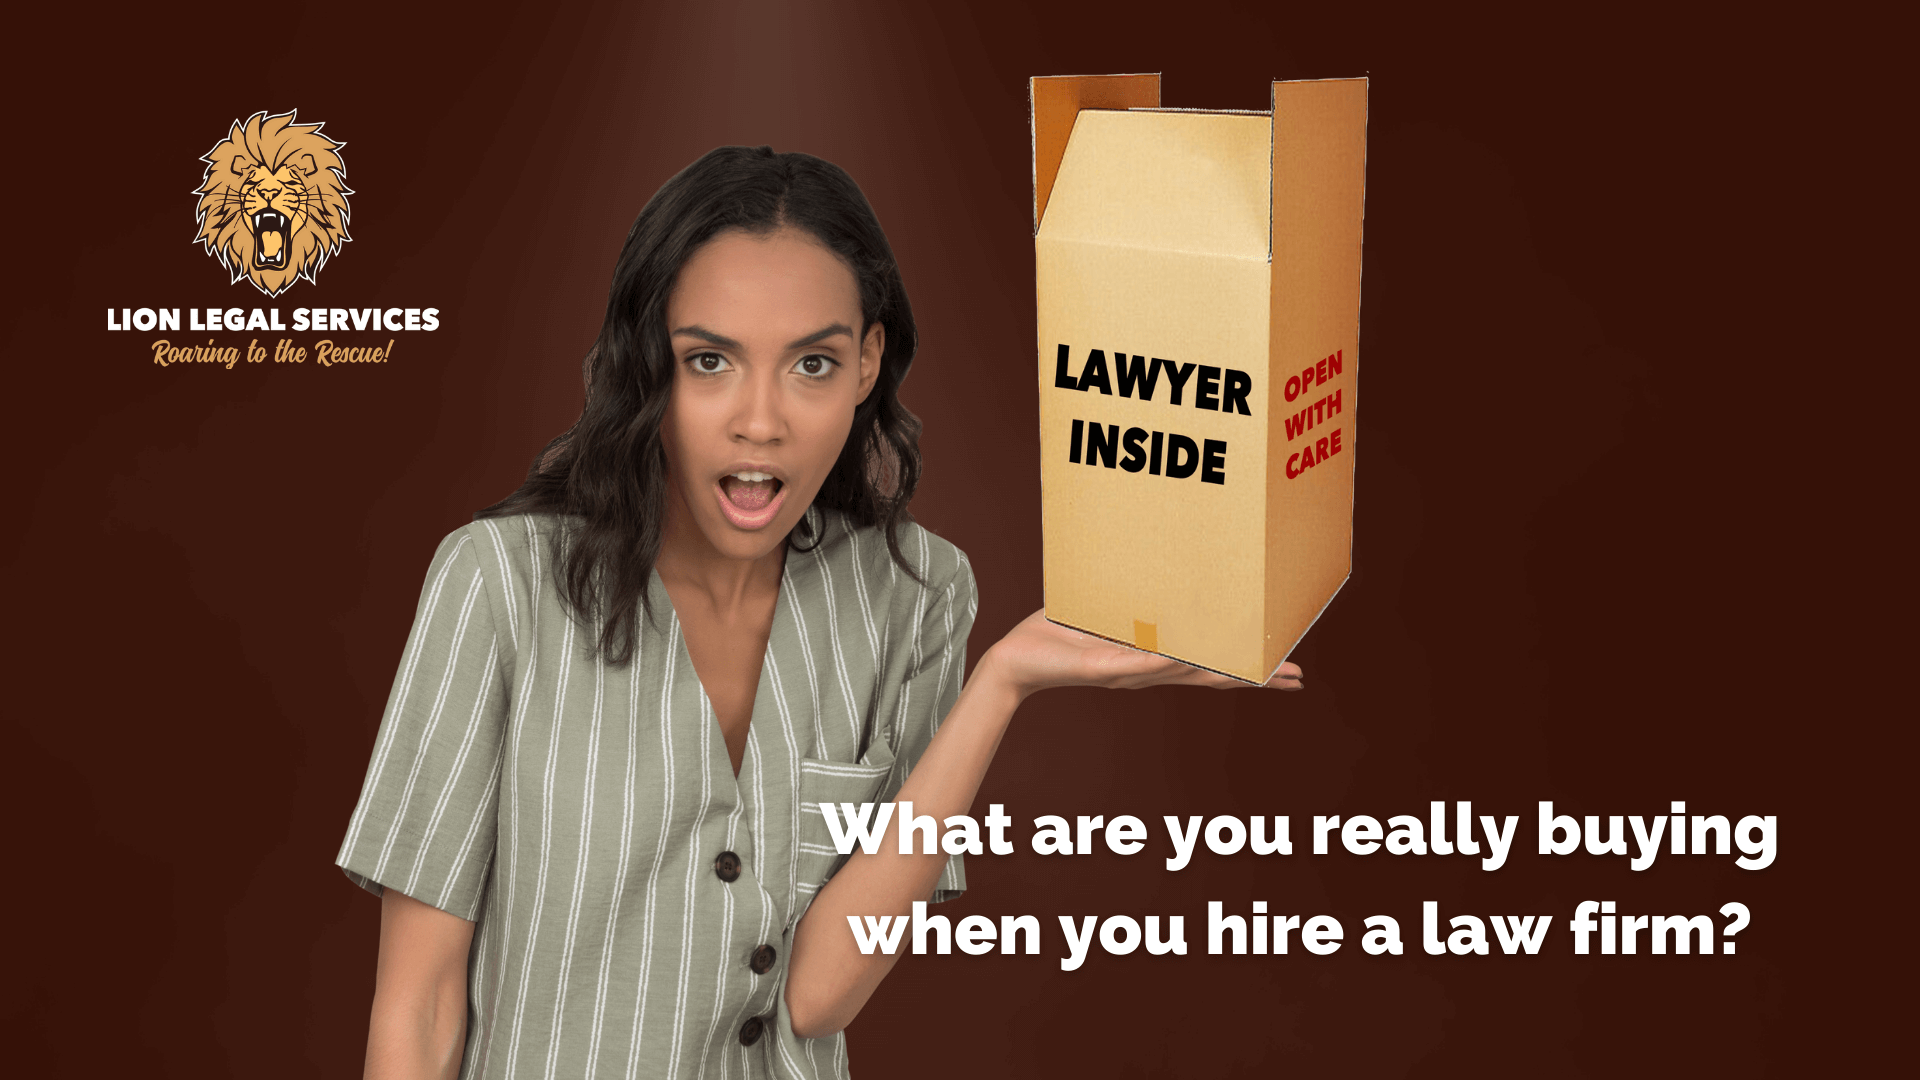 Featured image for the blog post "What are you really buying when you hire a law firm?"